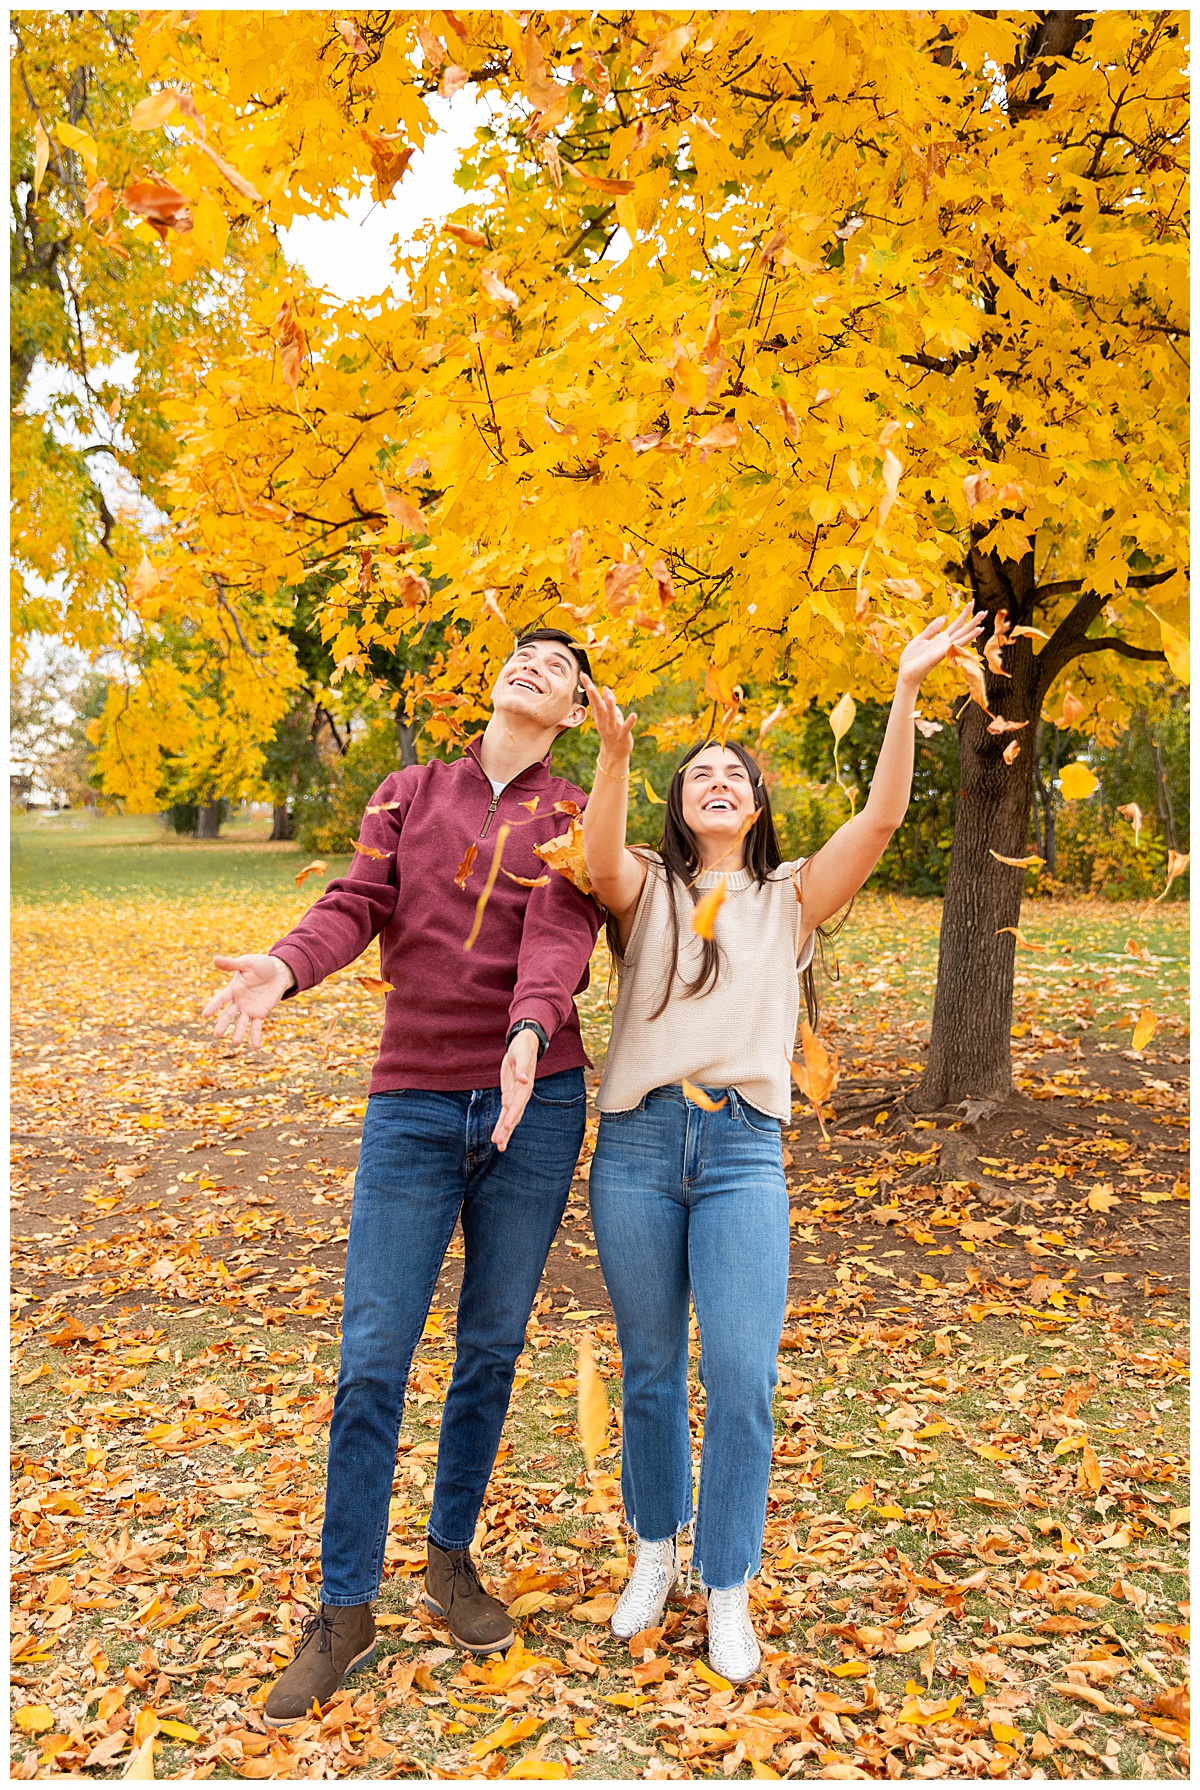 A couple poses in front of a bright yellow tree. The man is wearing a red sweater and blue jeans, the woman is wearing a sleeveless cream sweater and blue jeans.